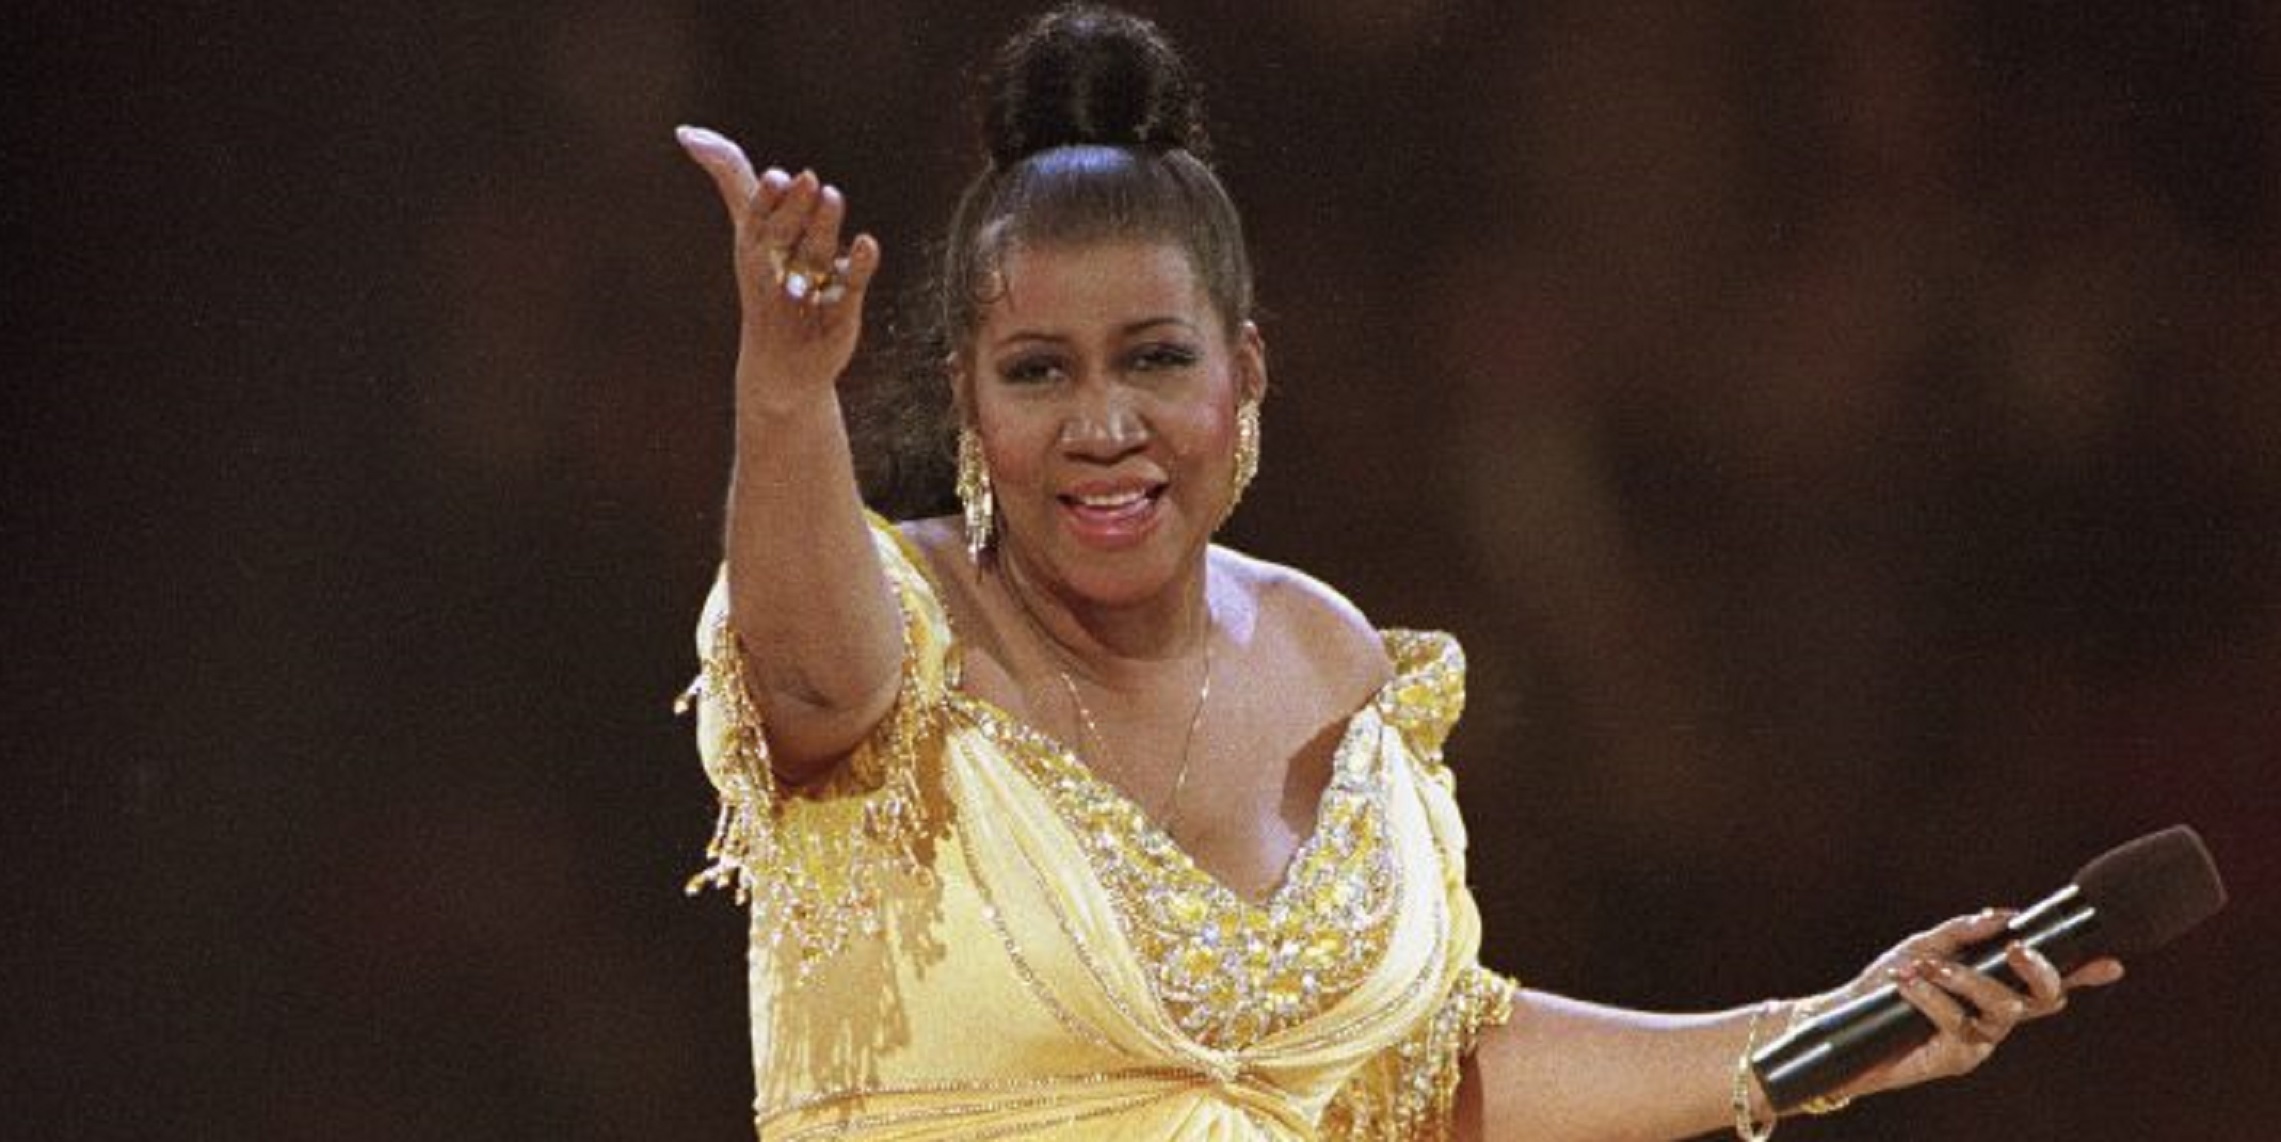 Throwback to 1993: When Aretha Franklin Took Her Classic ‘I Never Loved a Man’ to “Church”